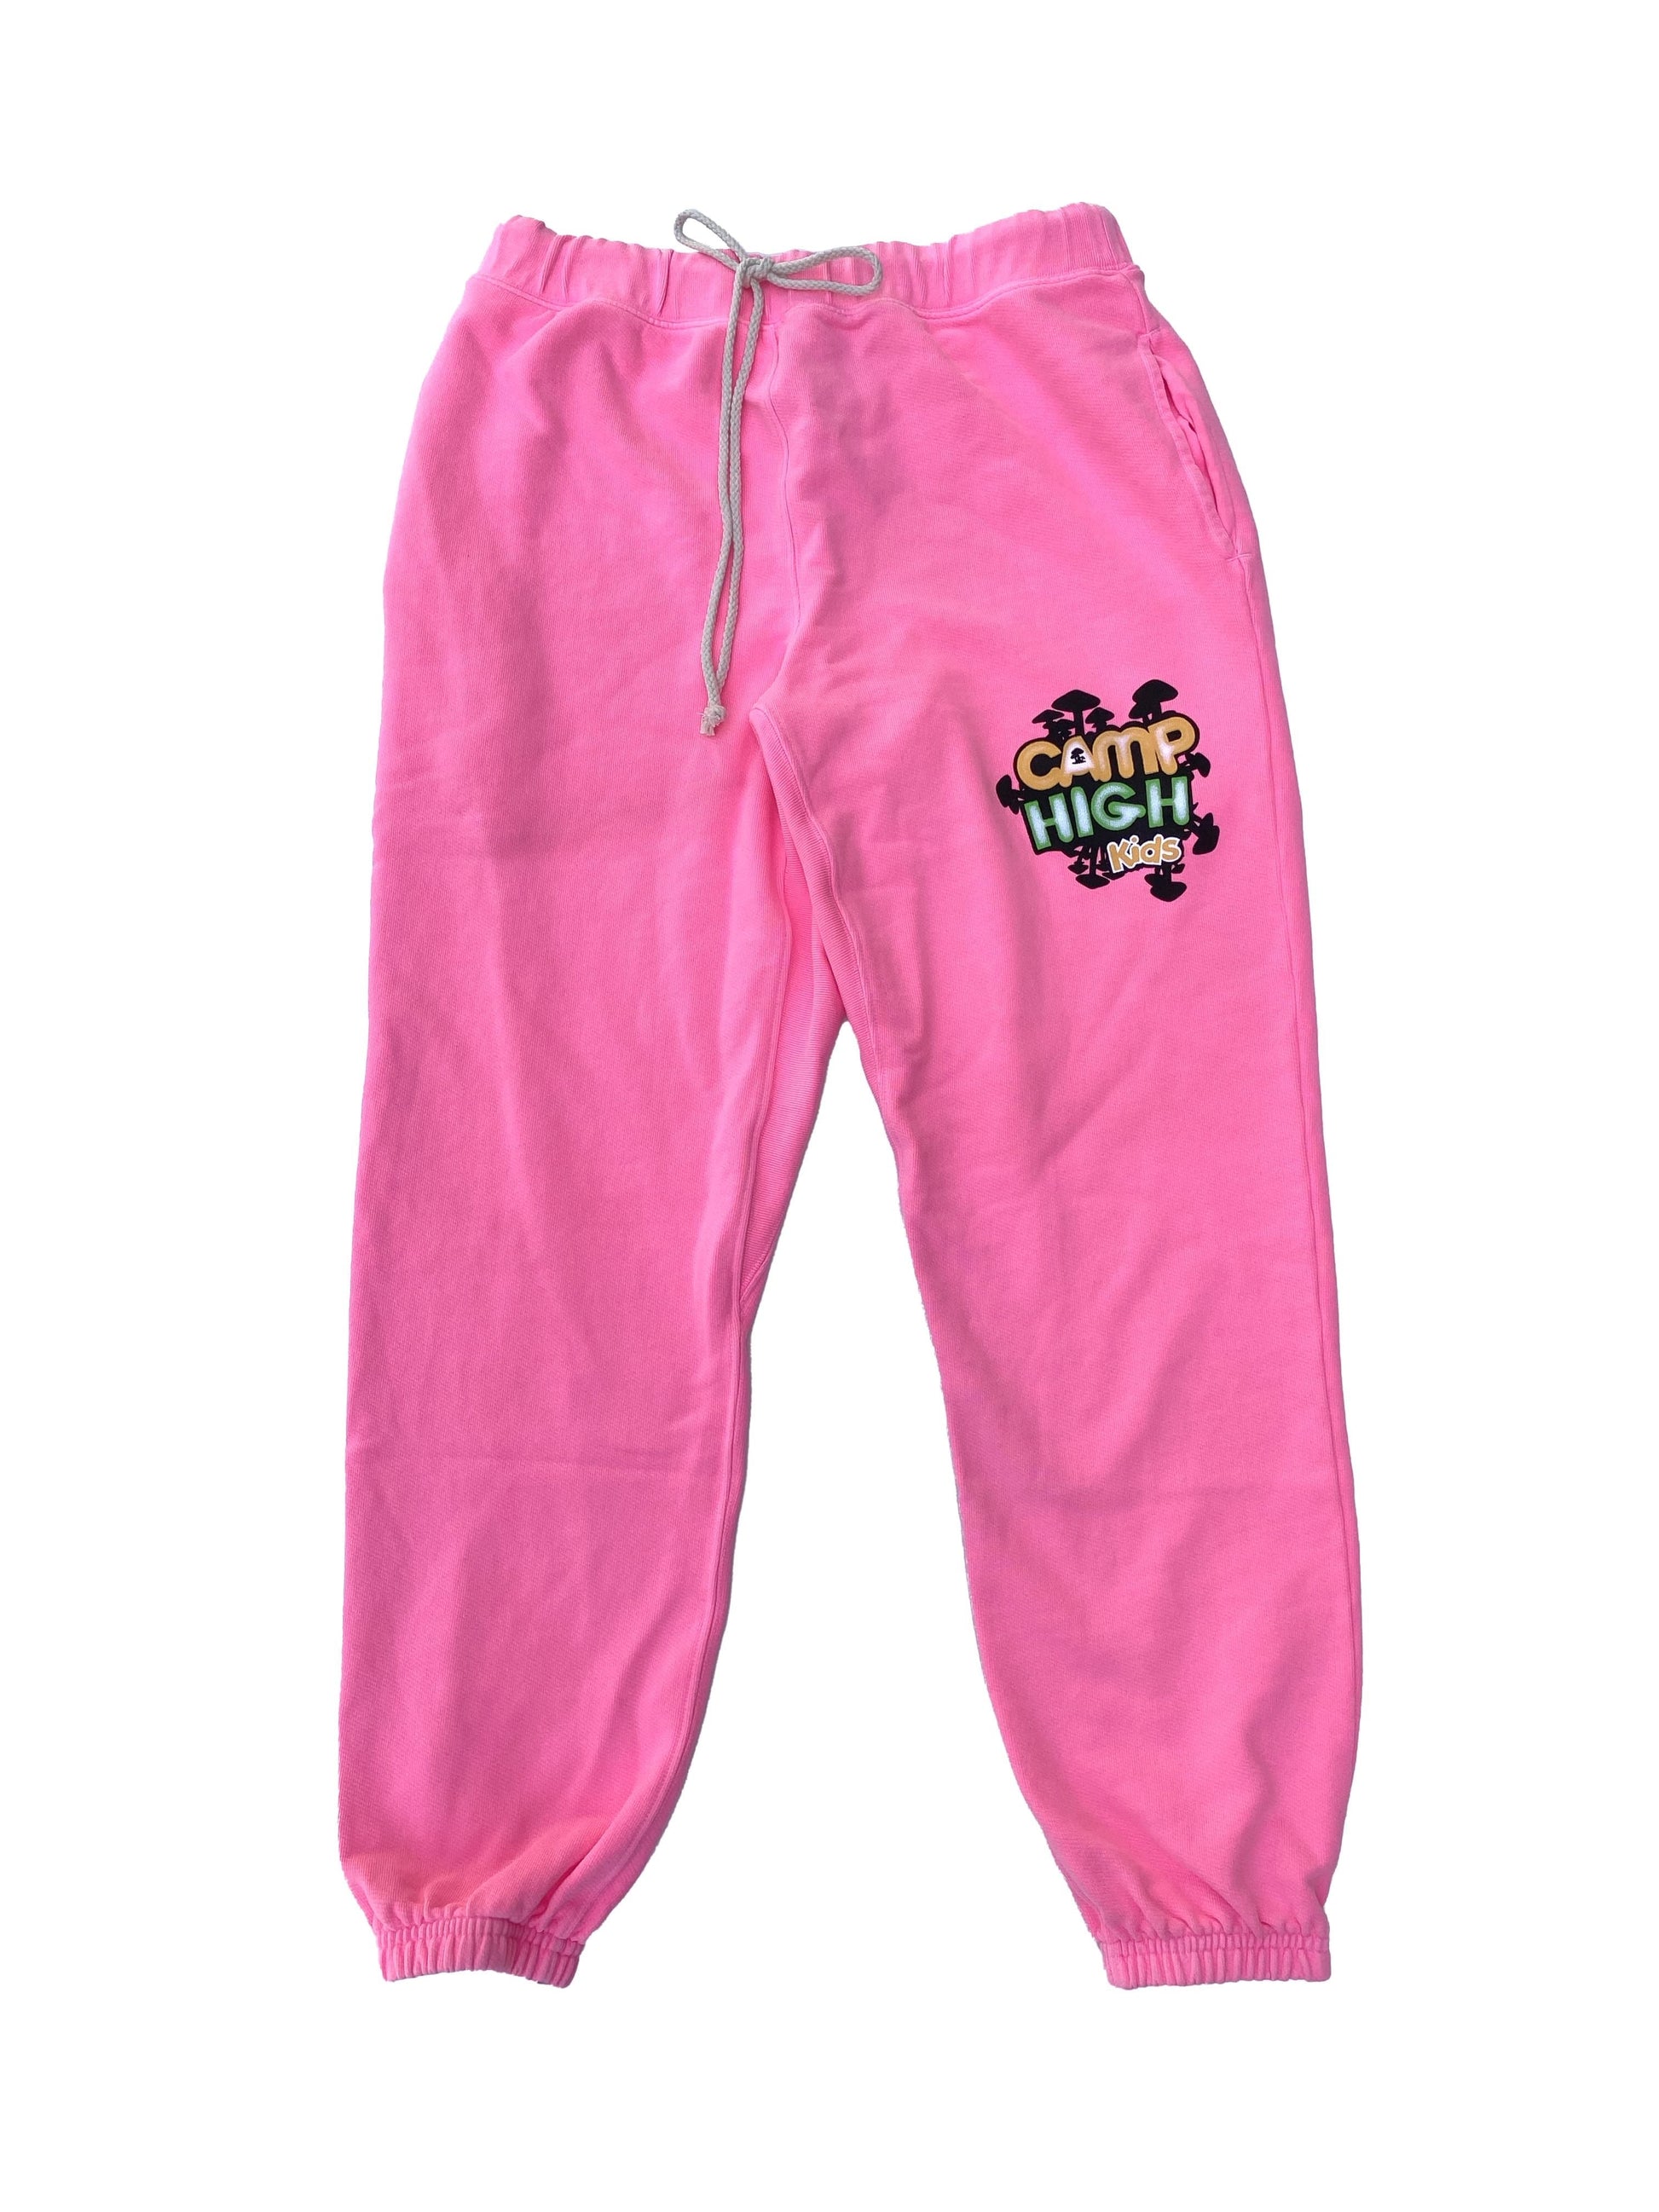 Camp High Perfect Pink / Small CAMP HIGH KIDS PANTS